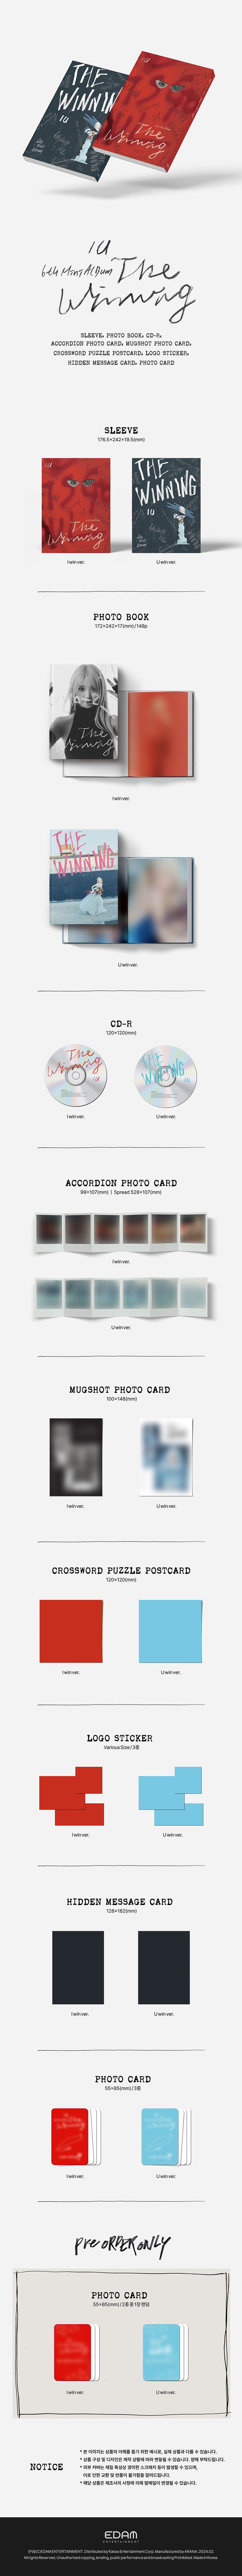 1 CD
1 Photo Book (148 pages)
1 Accordion Photo Card
1 Mugshot Photo Card
1 Crossword Puzzle Postcard
3 Logo Stickers
1 Hi...